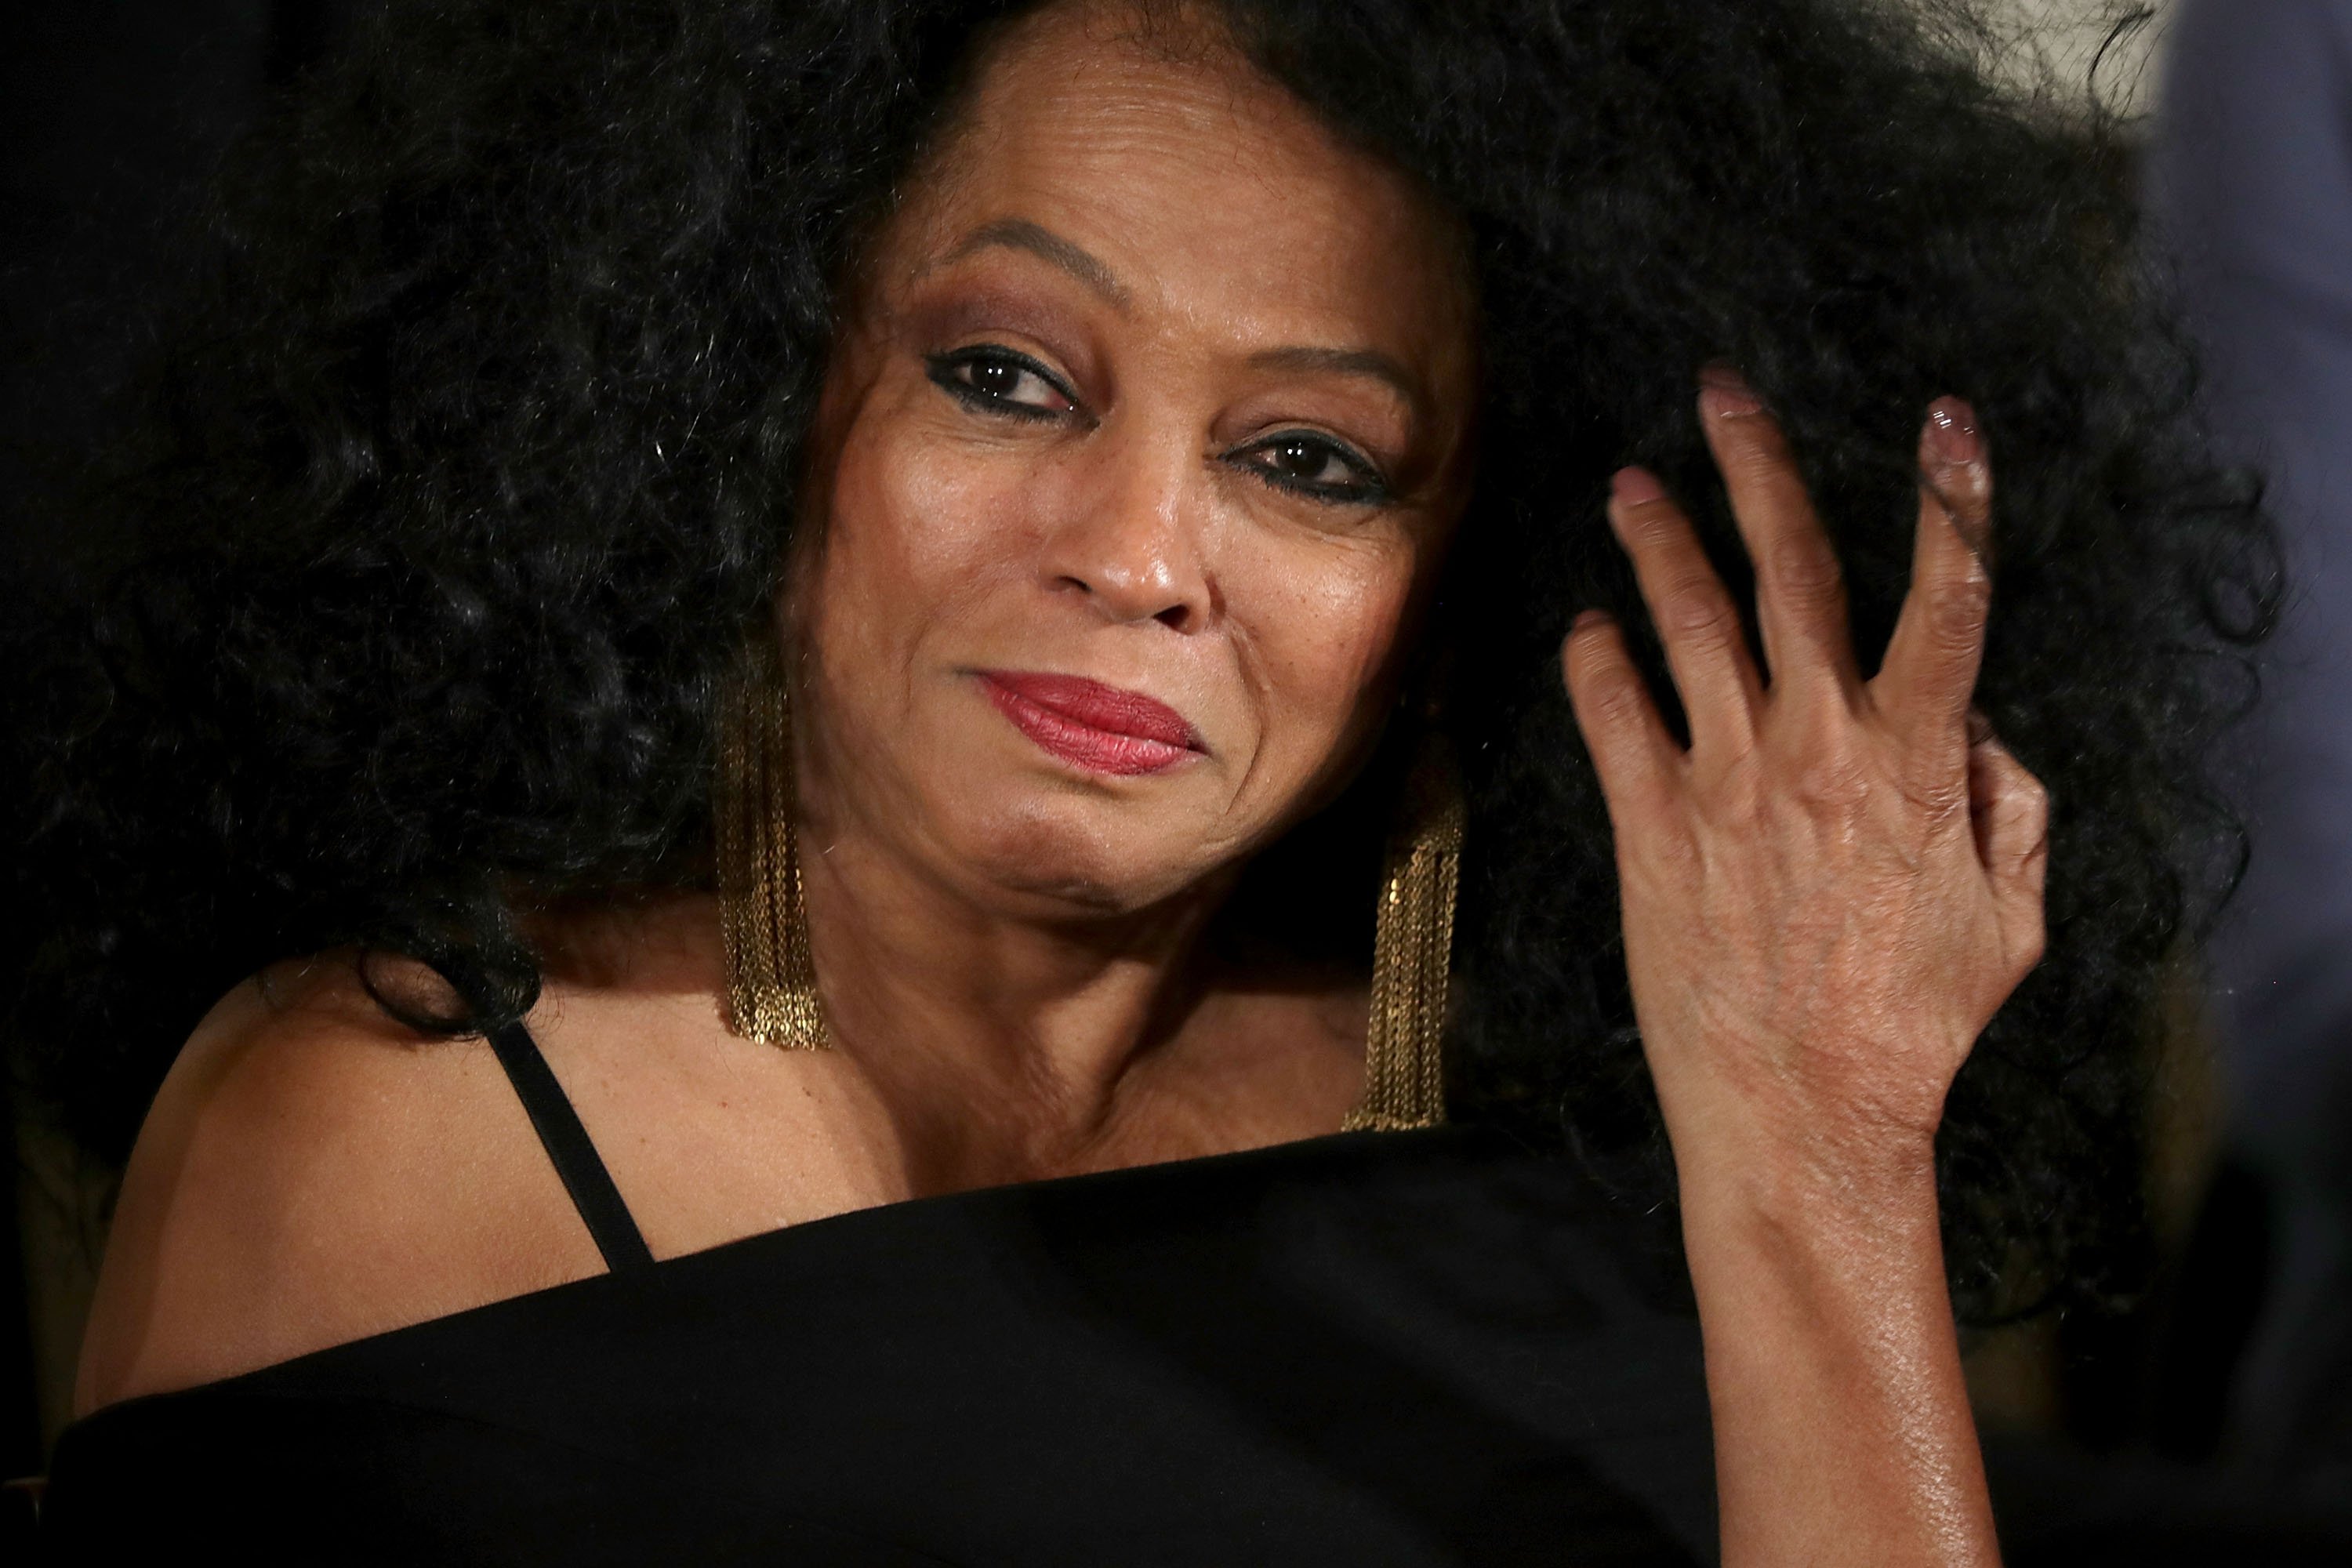 Diana Ross during a ceremony at the White House, November 22, 2016 in Washington, DC. | Photo: Getty Images